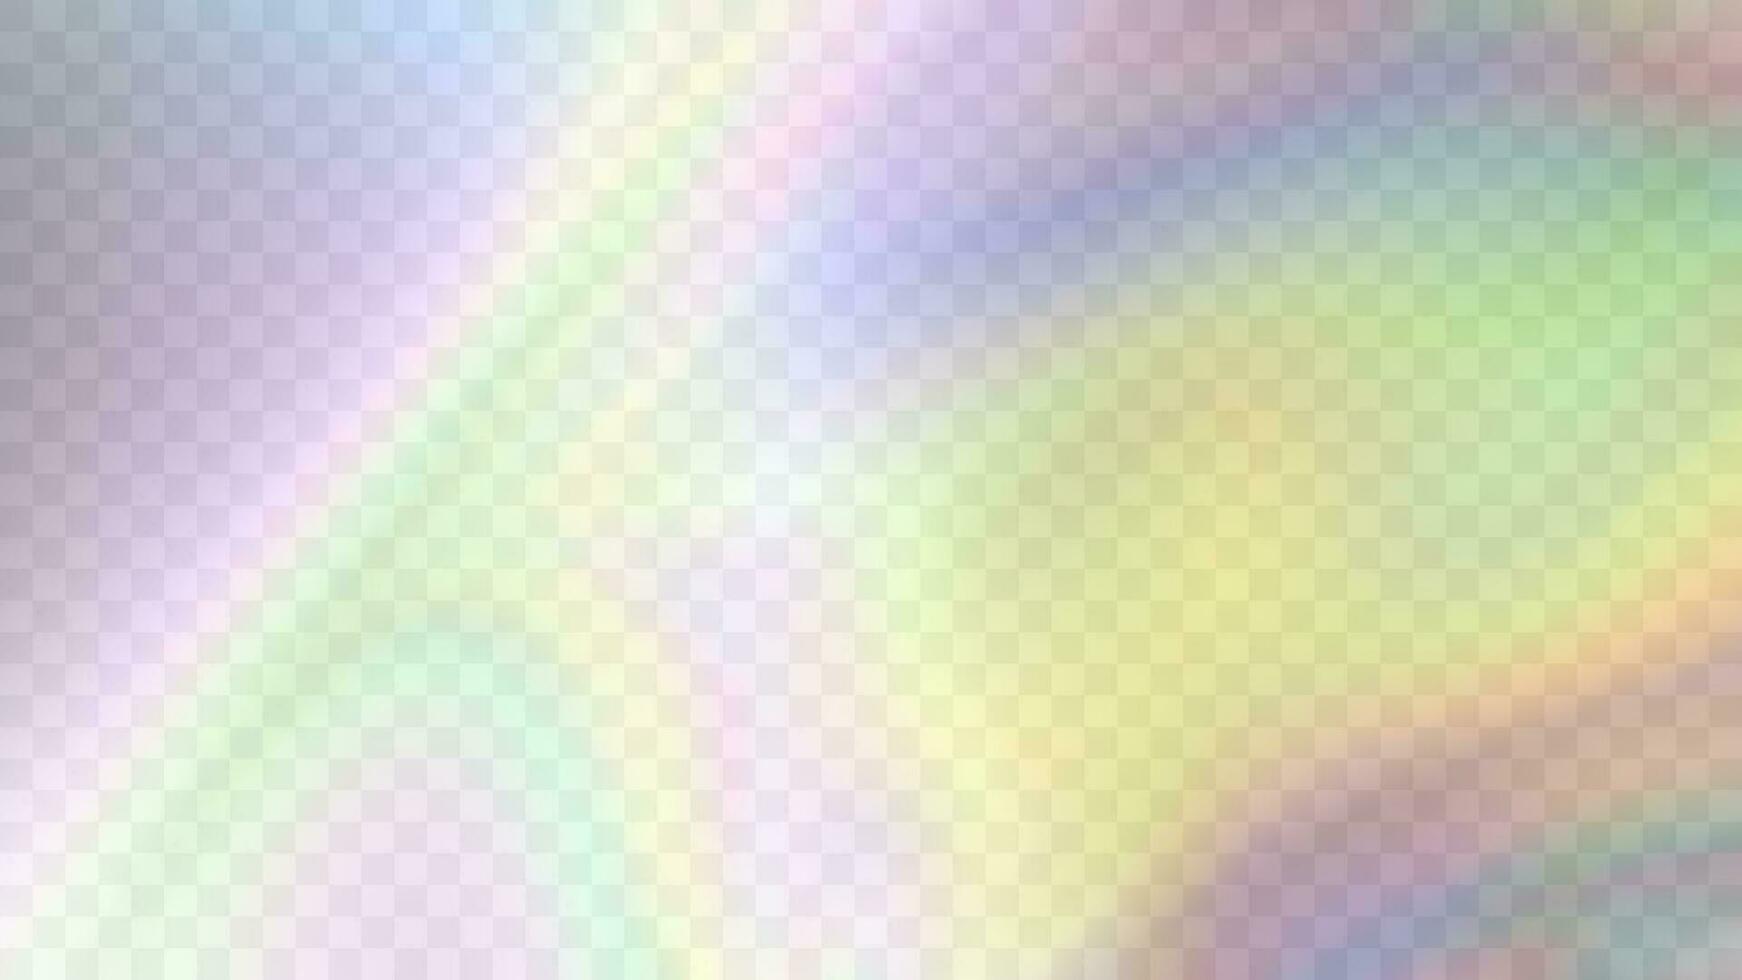 Modern blurred gradient background in trendy retro 90s, 00s style. Y2K aesthetic. Rainbow light prism effect. Hologram reflection. Poster template for social media posts, digital marketing vector